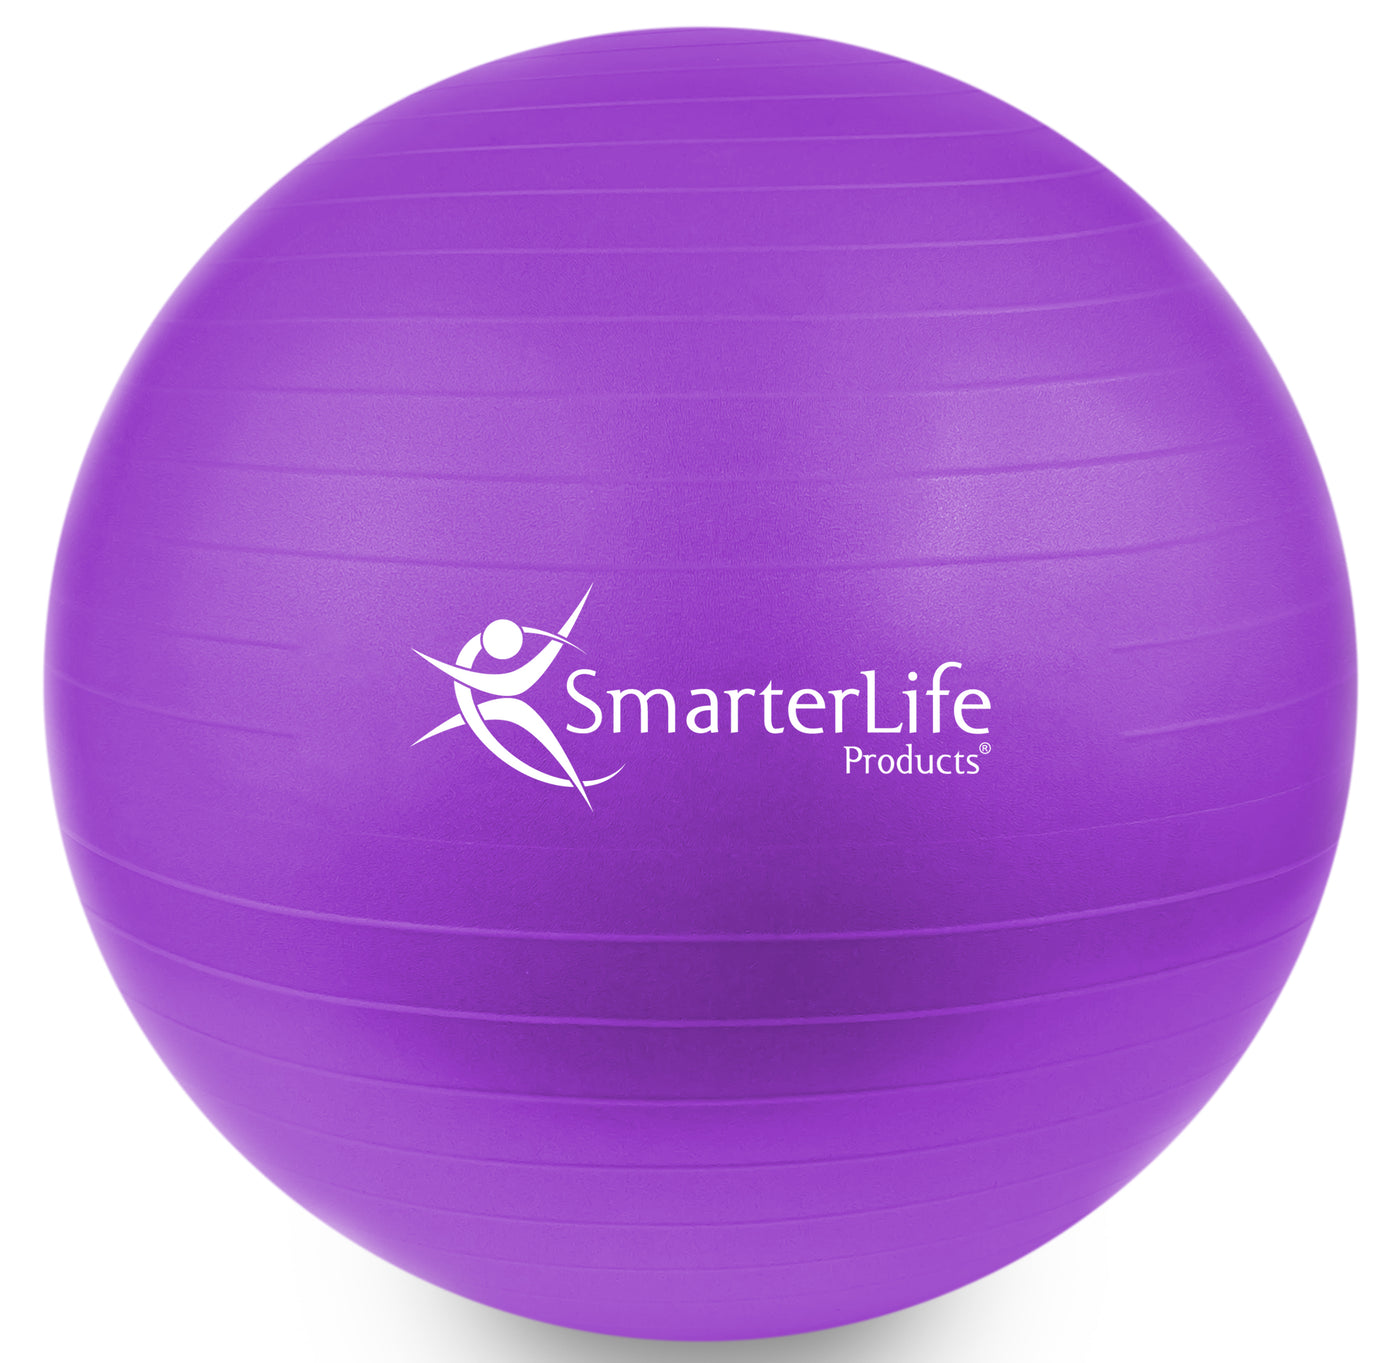 Premium Exercise Ball - SmarterLife Products